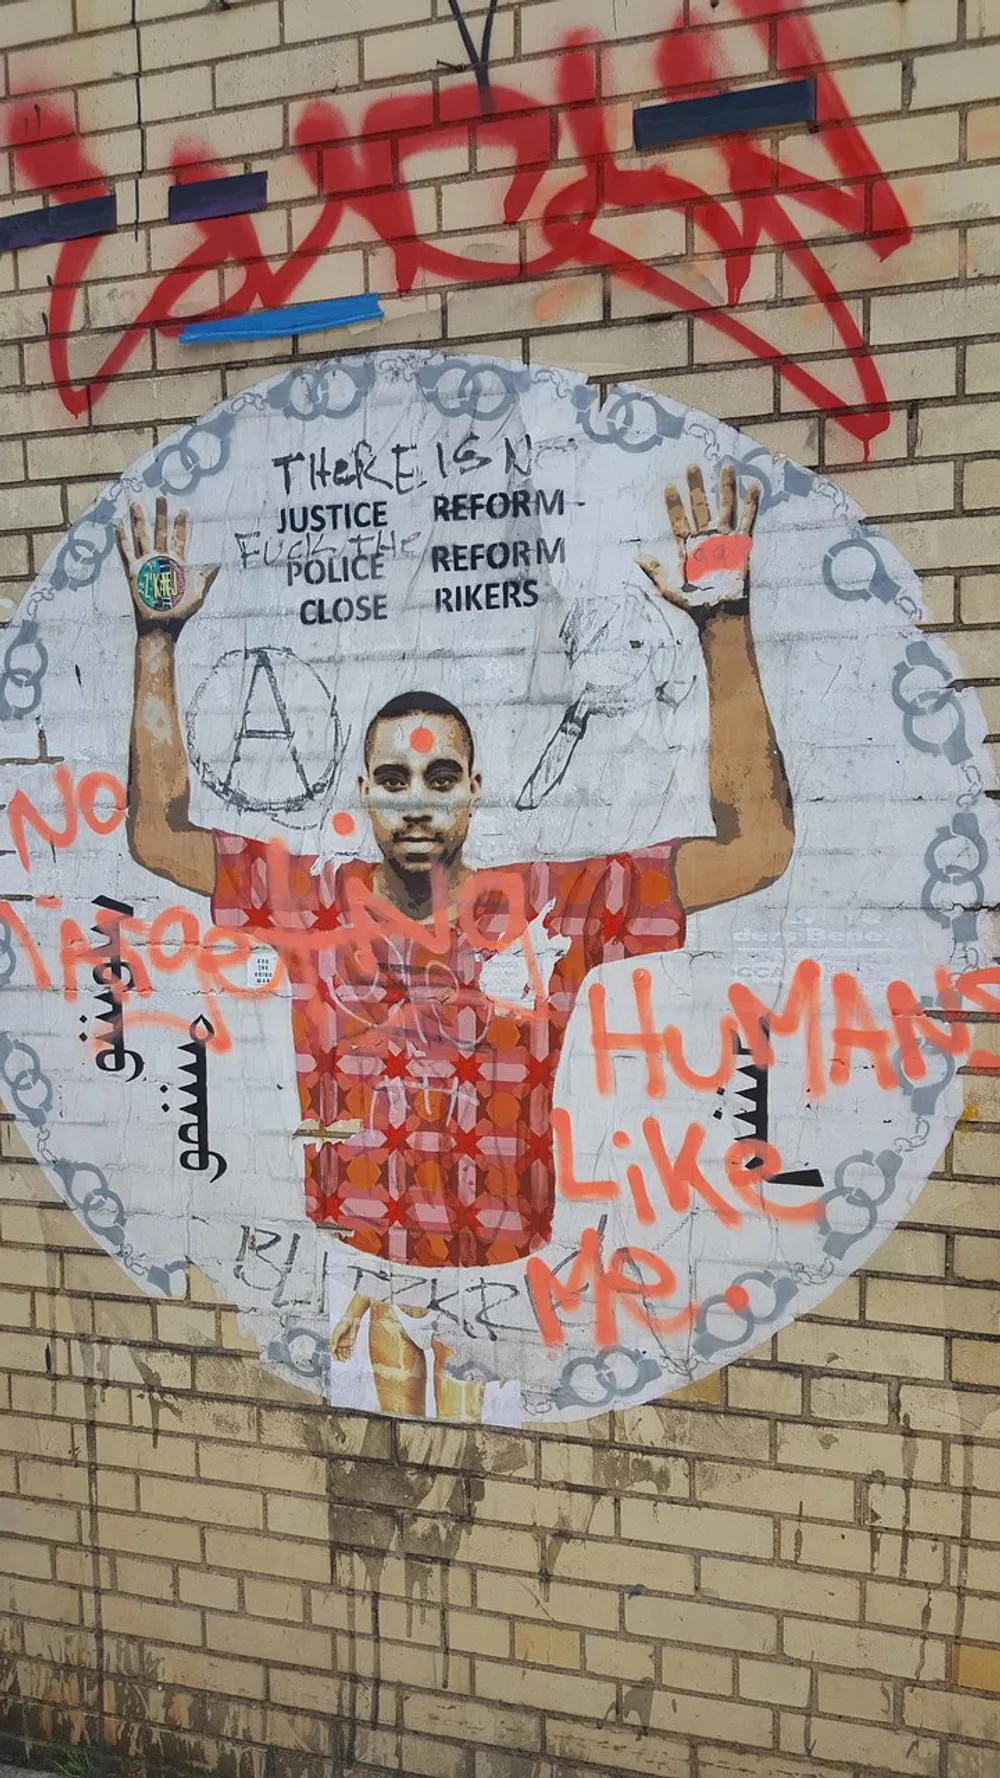 The image shows a piece of urban street art of a person with text and graphic elements advocating for justice reform and the closure of Rikers further emblazoned with graffiti marks